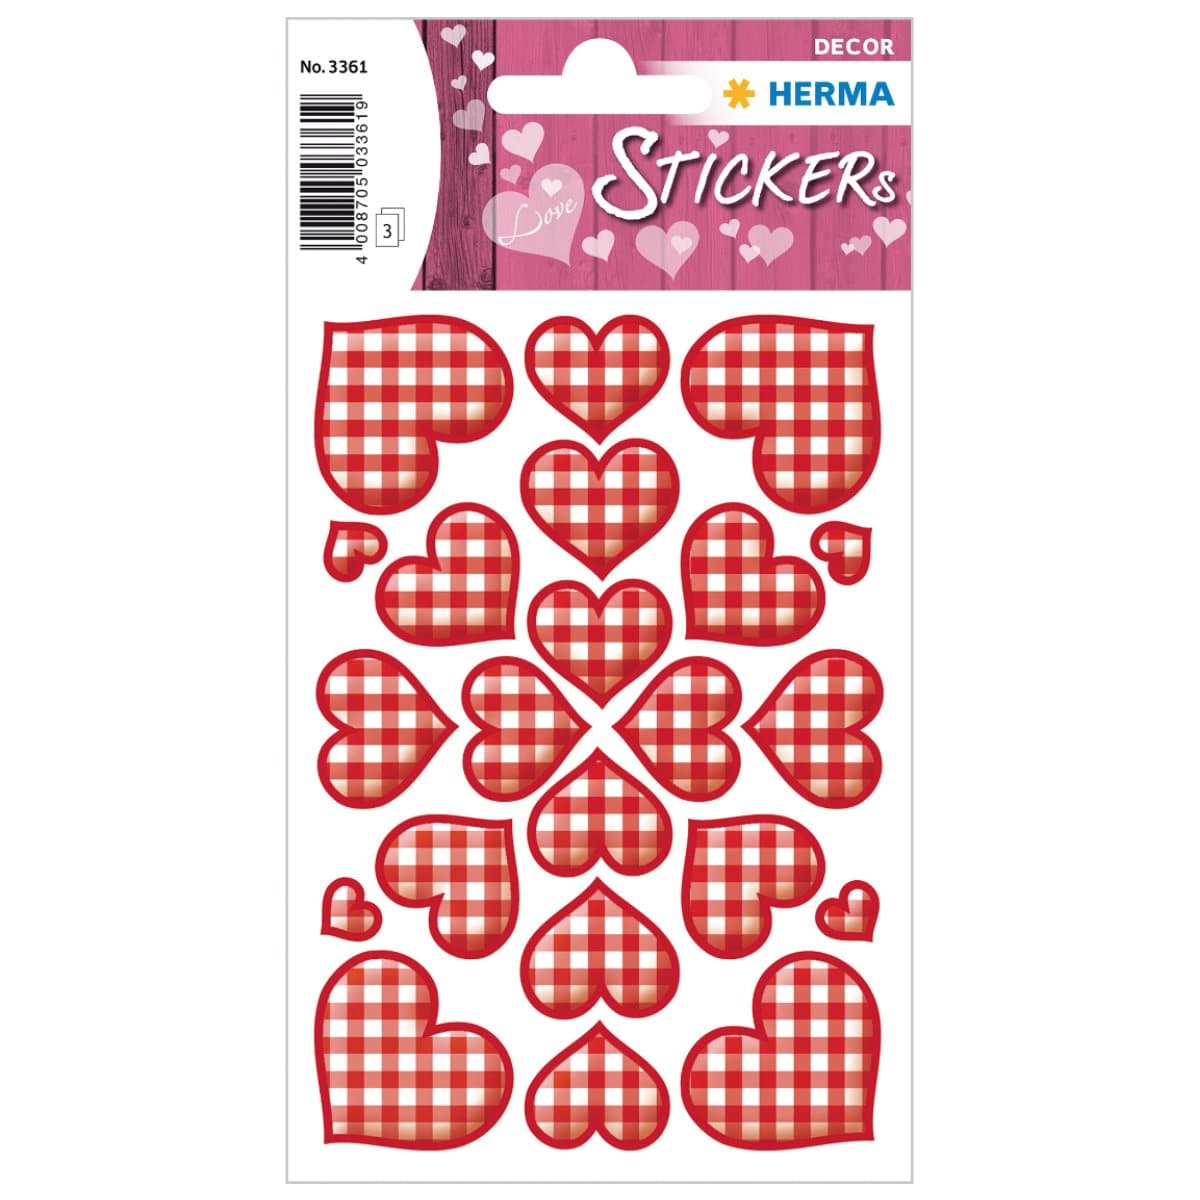 Herma Decor Stickers CHECKED HEARTS, 3 sheets/pack, Red